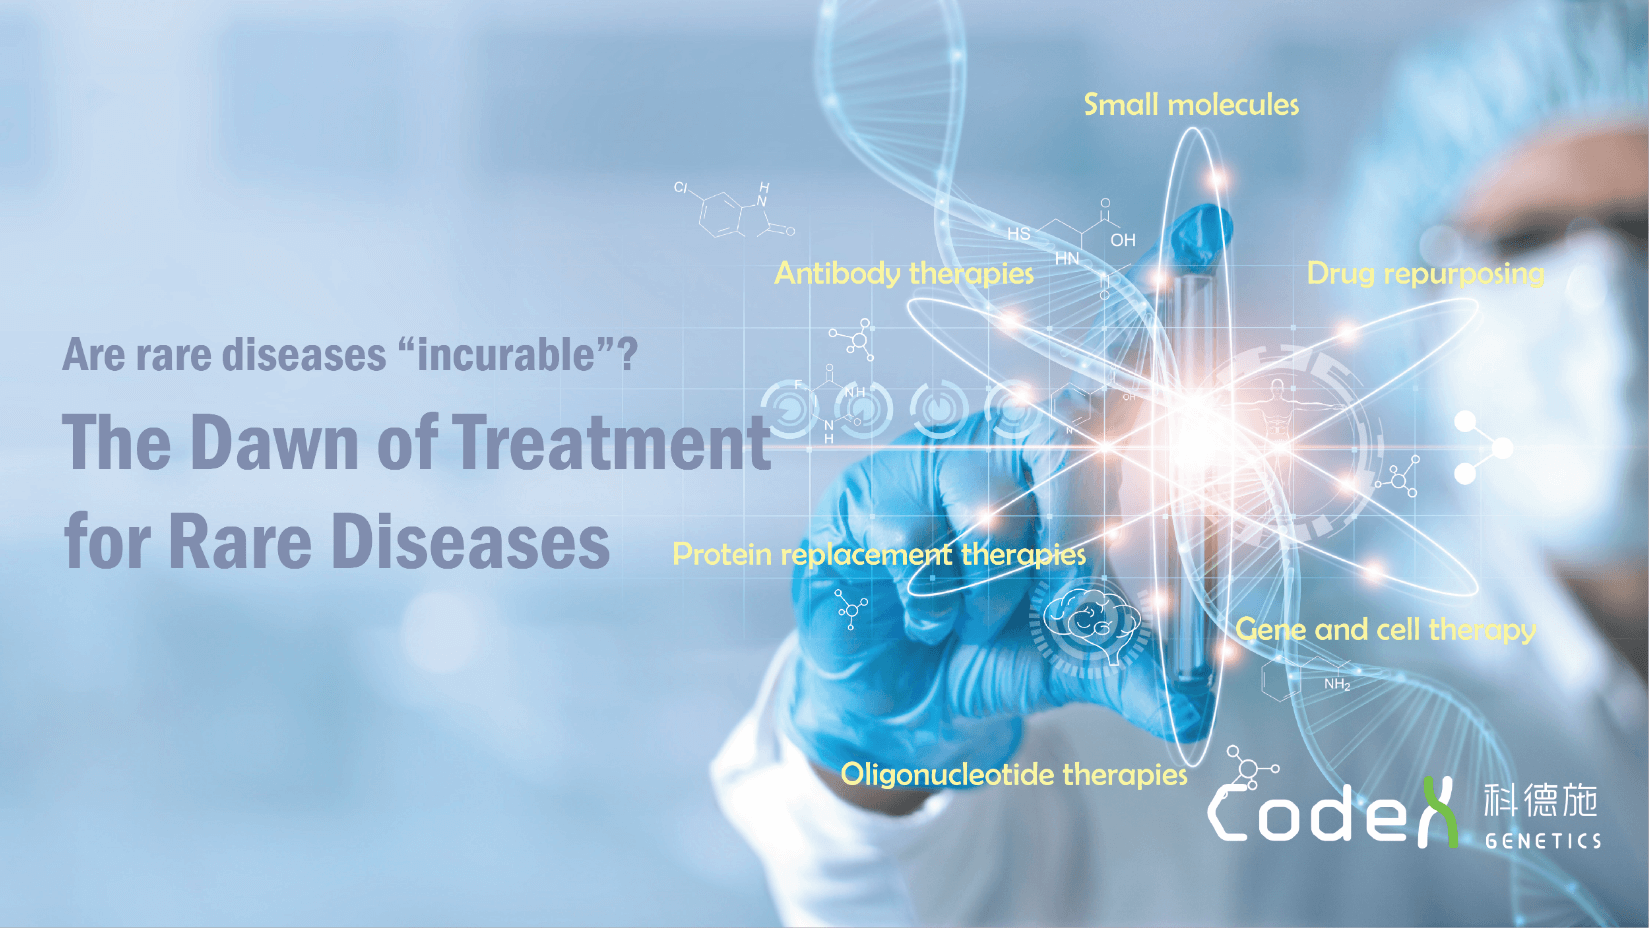 Treatment for Rare Diseases